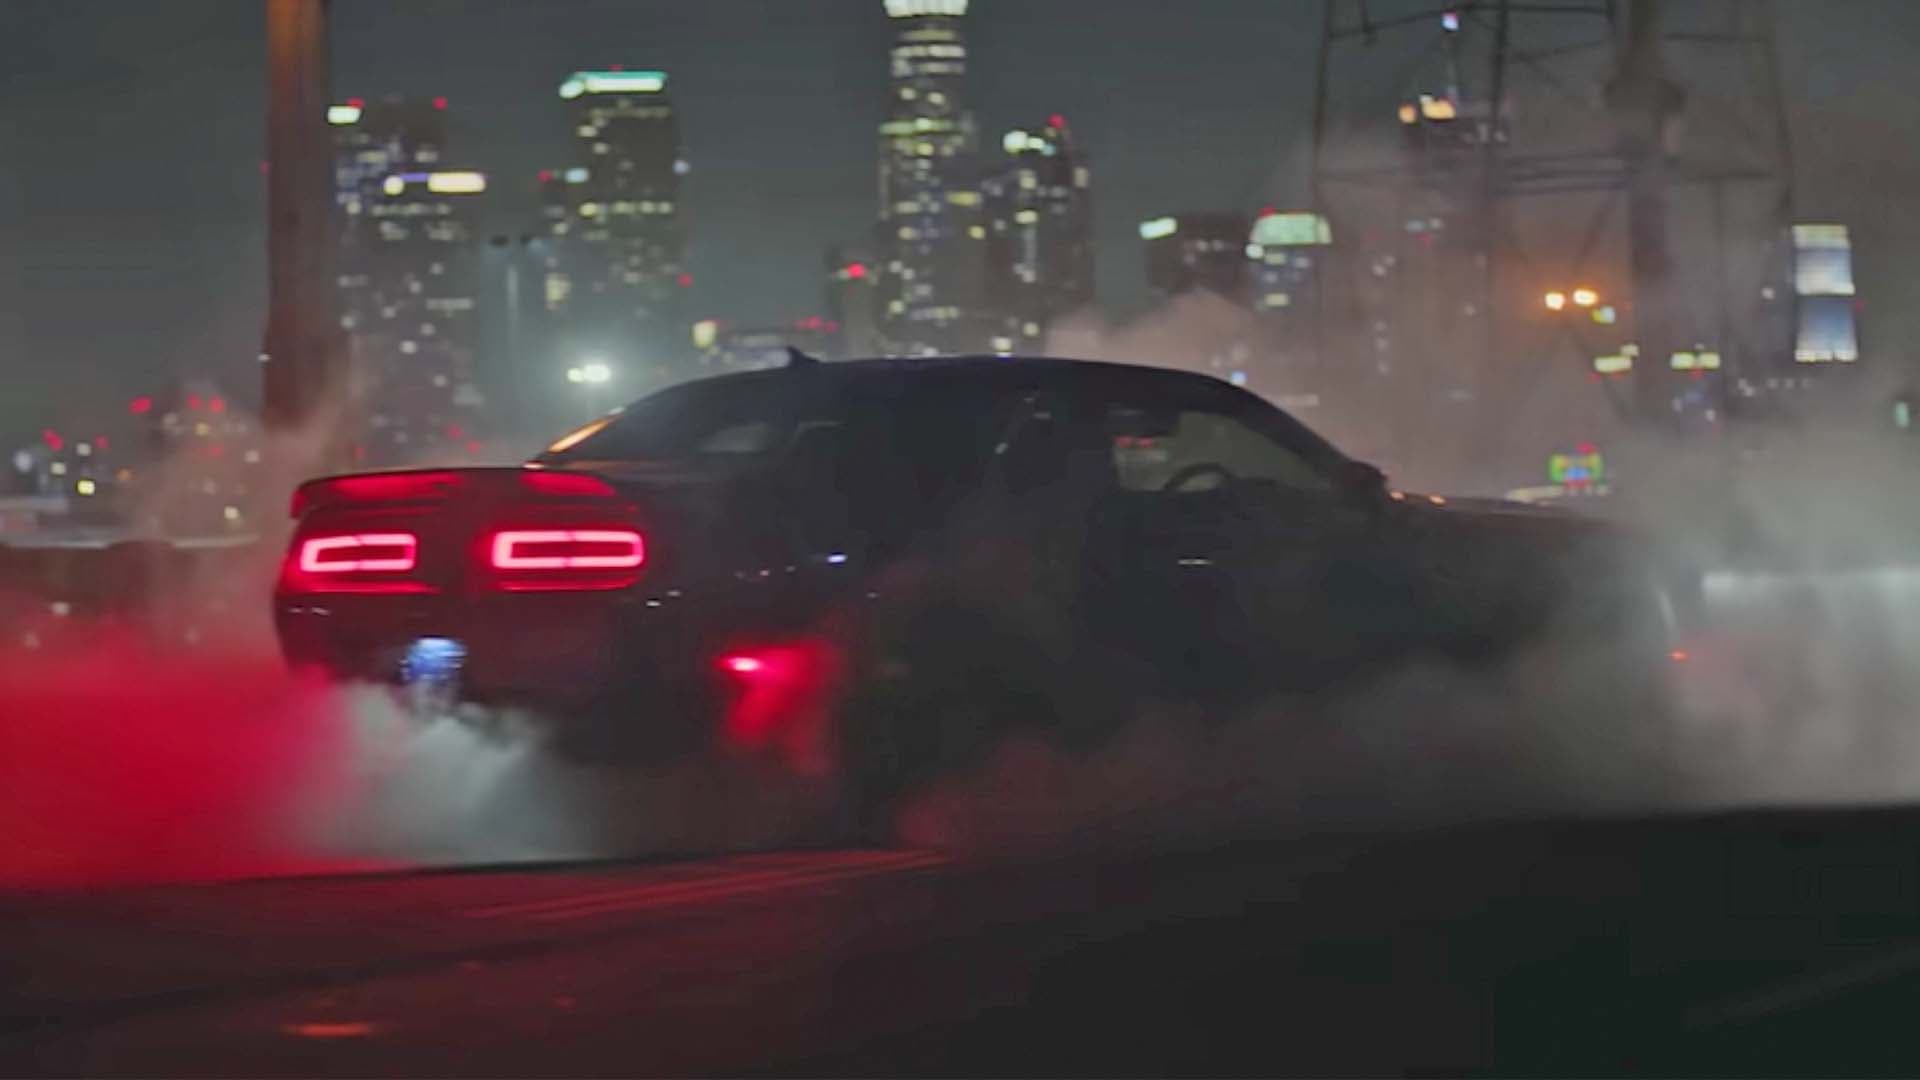 Electric Dodge Muscle Cars Will Make a ‘Sound You Cannot Imagine’